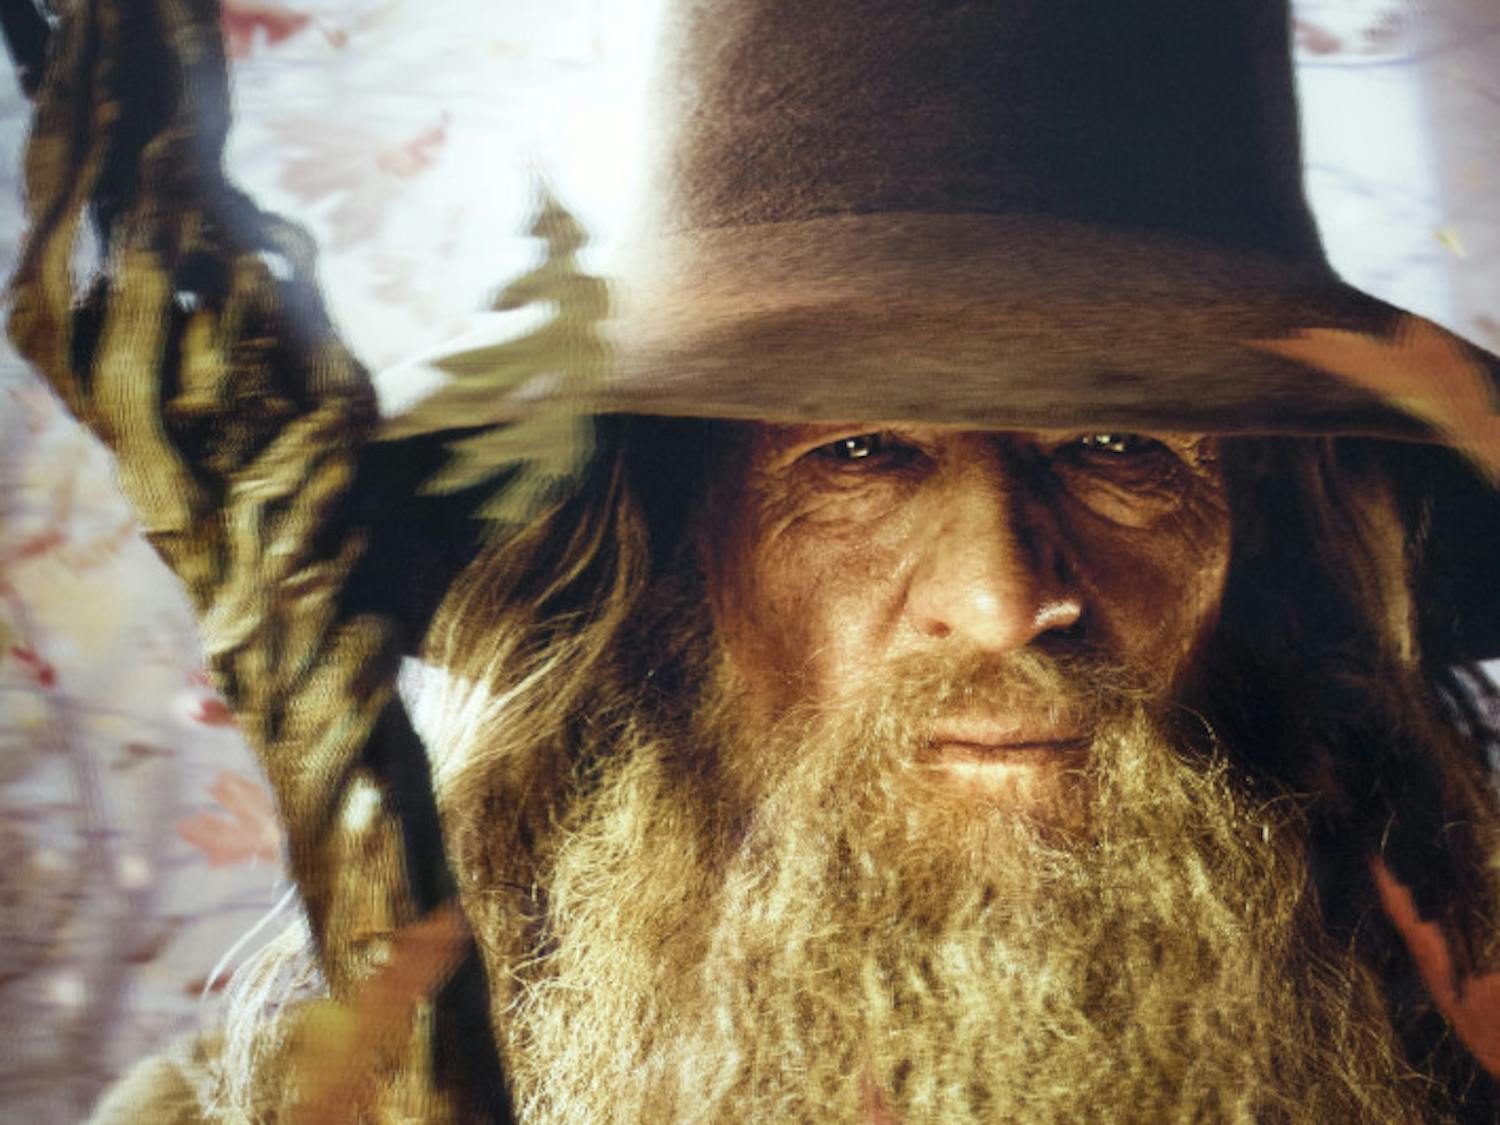 "Gandalf" by Nathan Rupert, used under CC BY-NC-ND 2.0